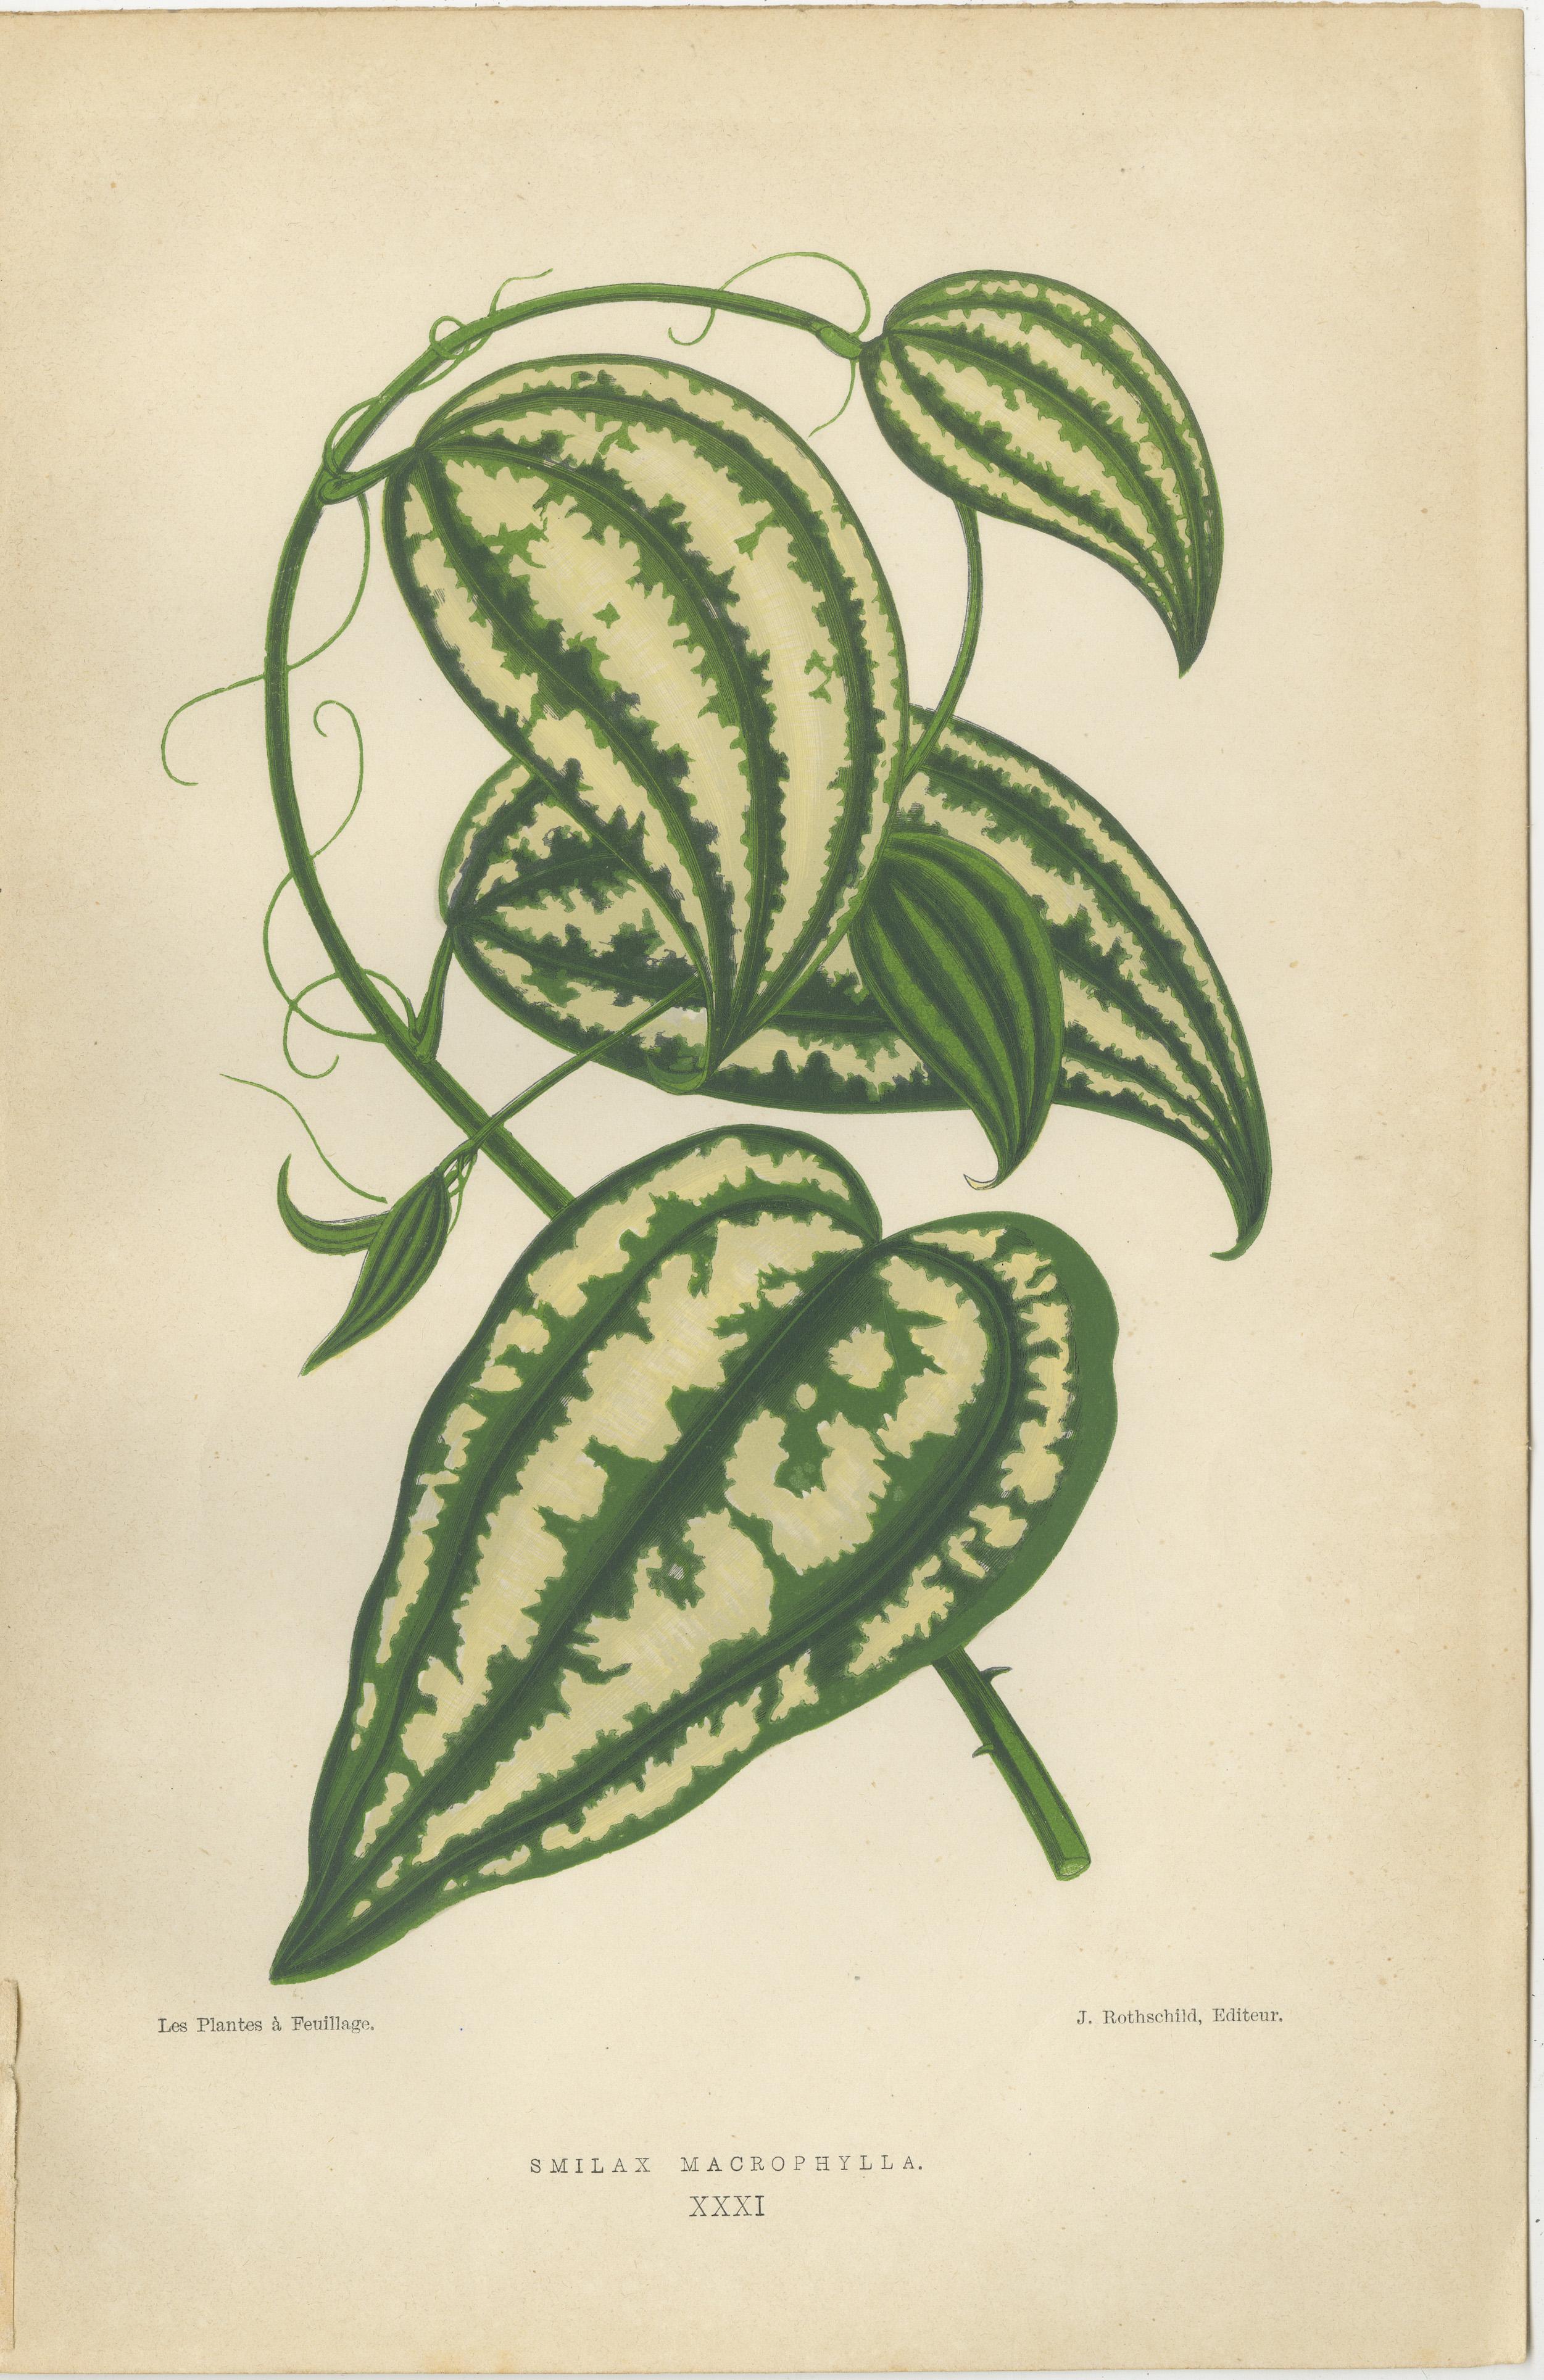 The images are botanical illustrations from 